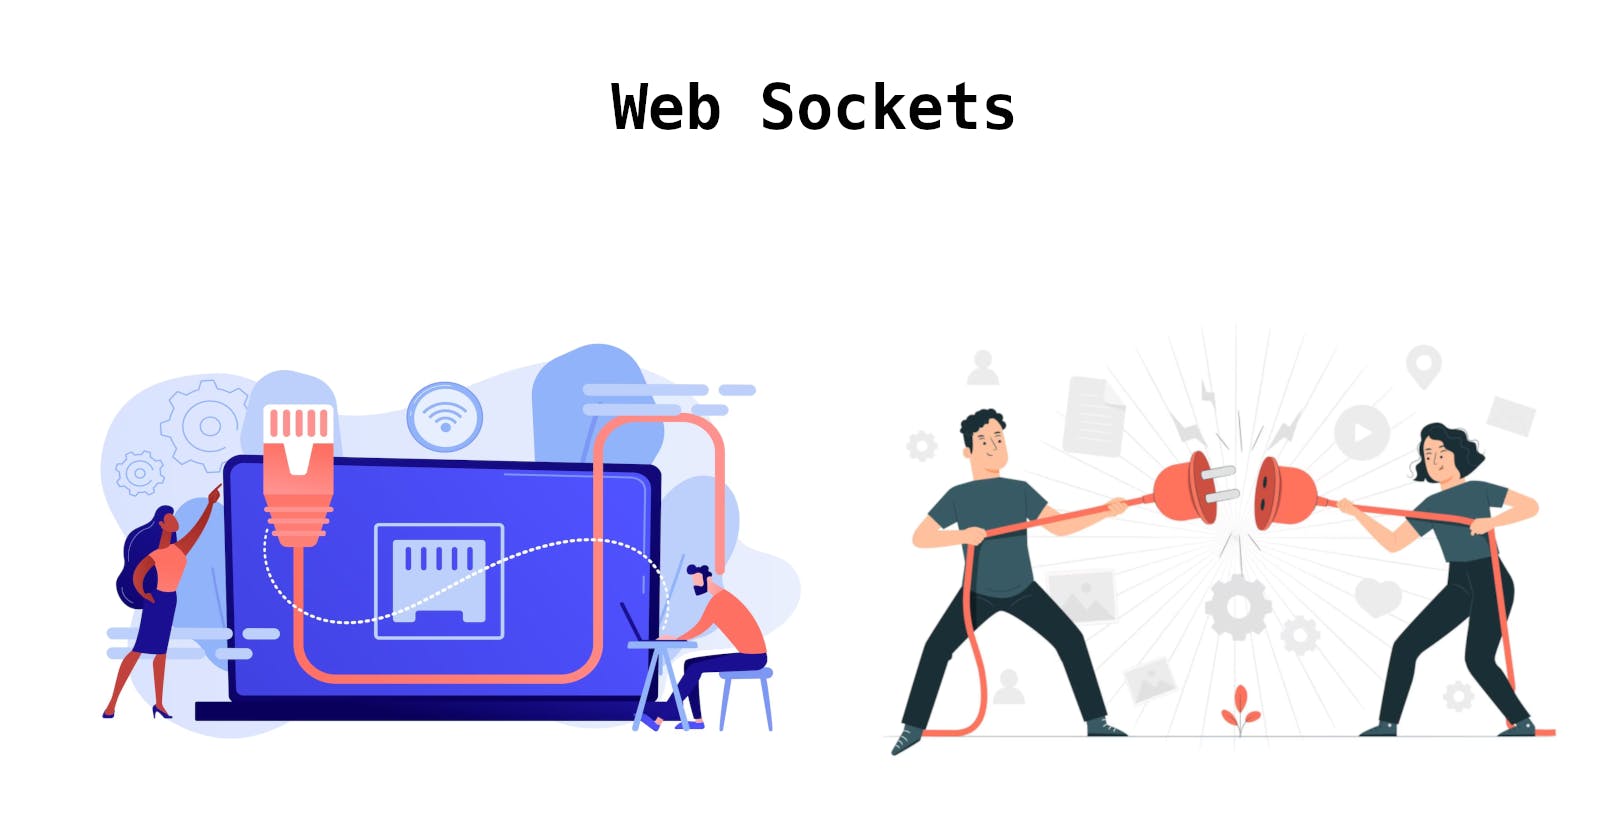 What are Web Sockets?